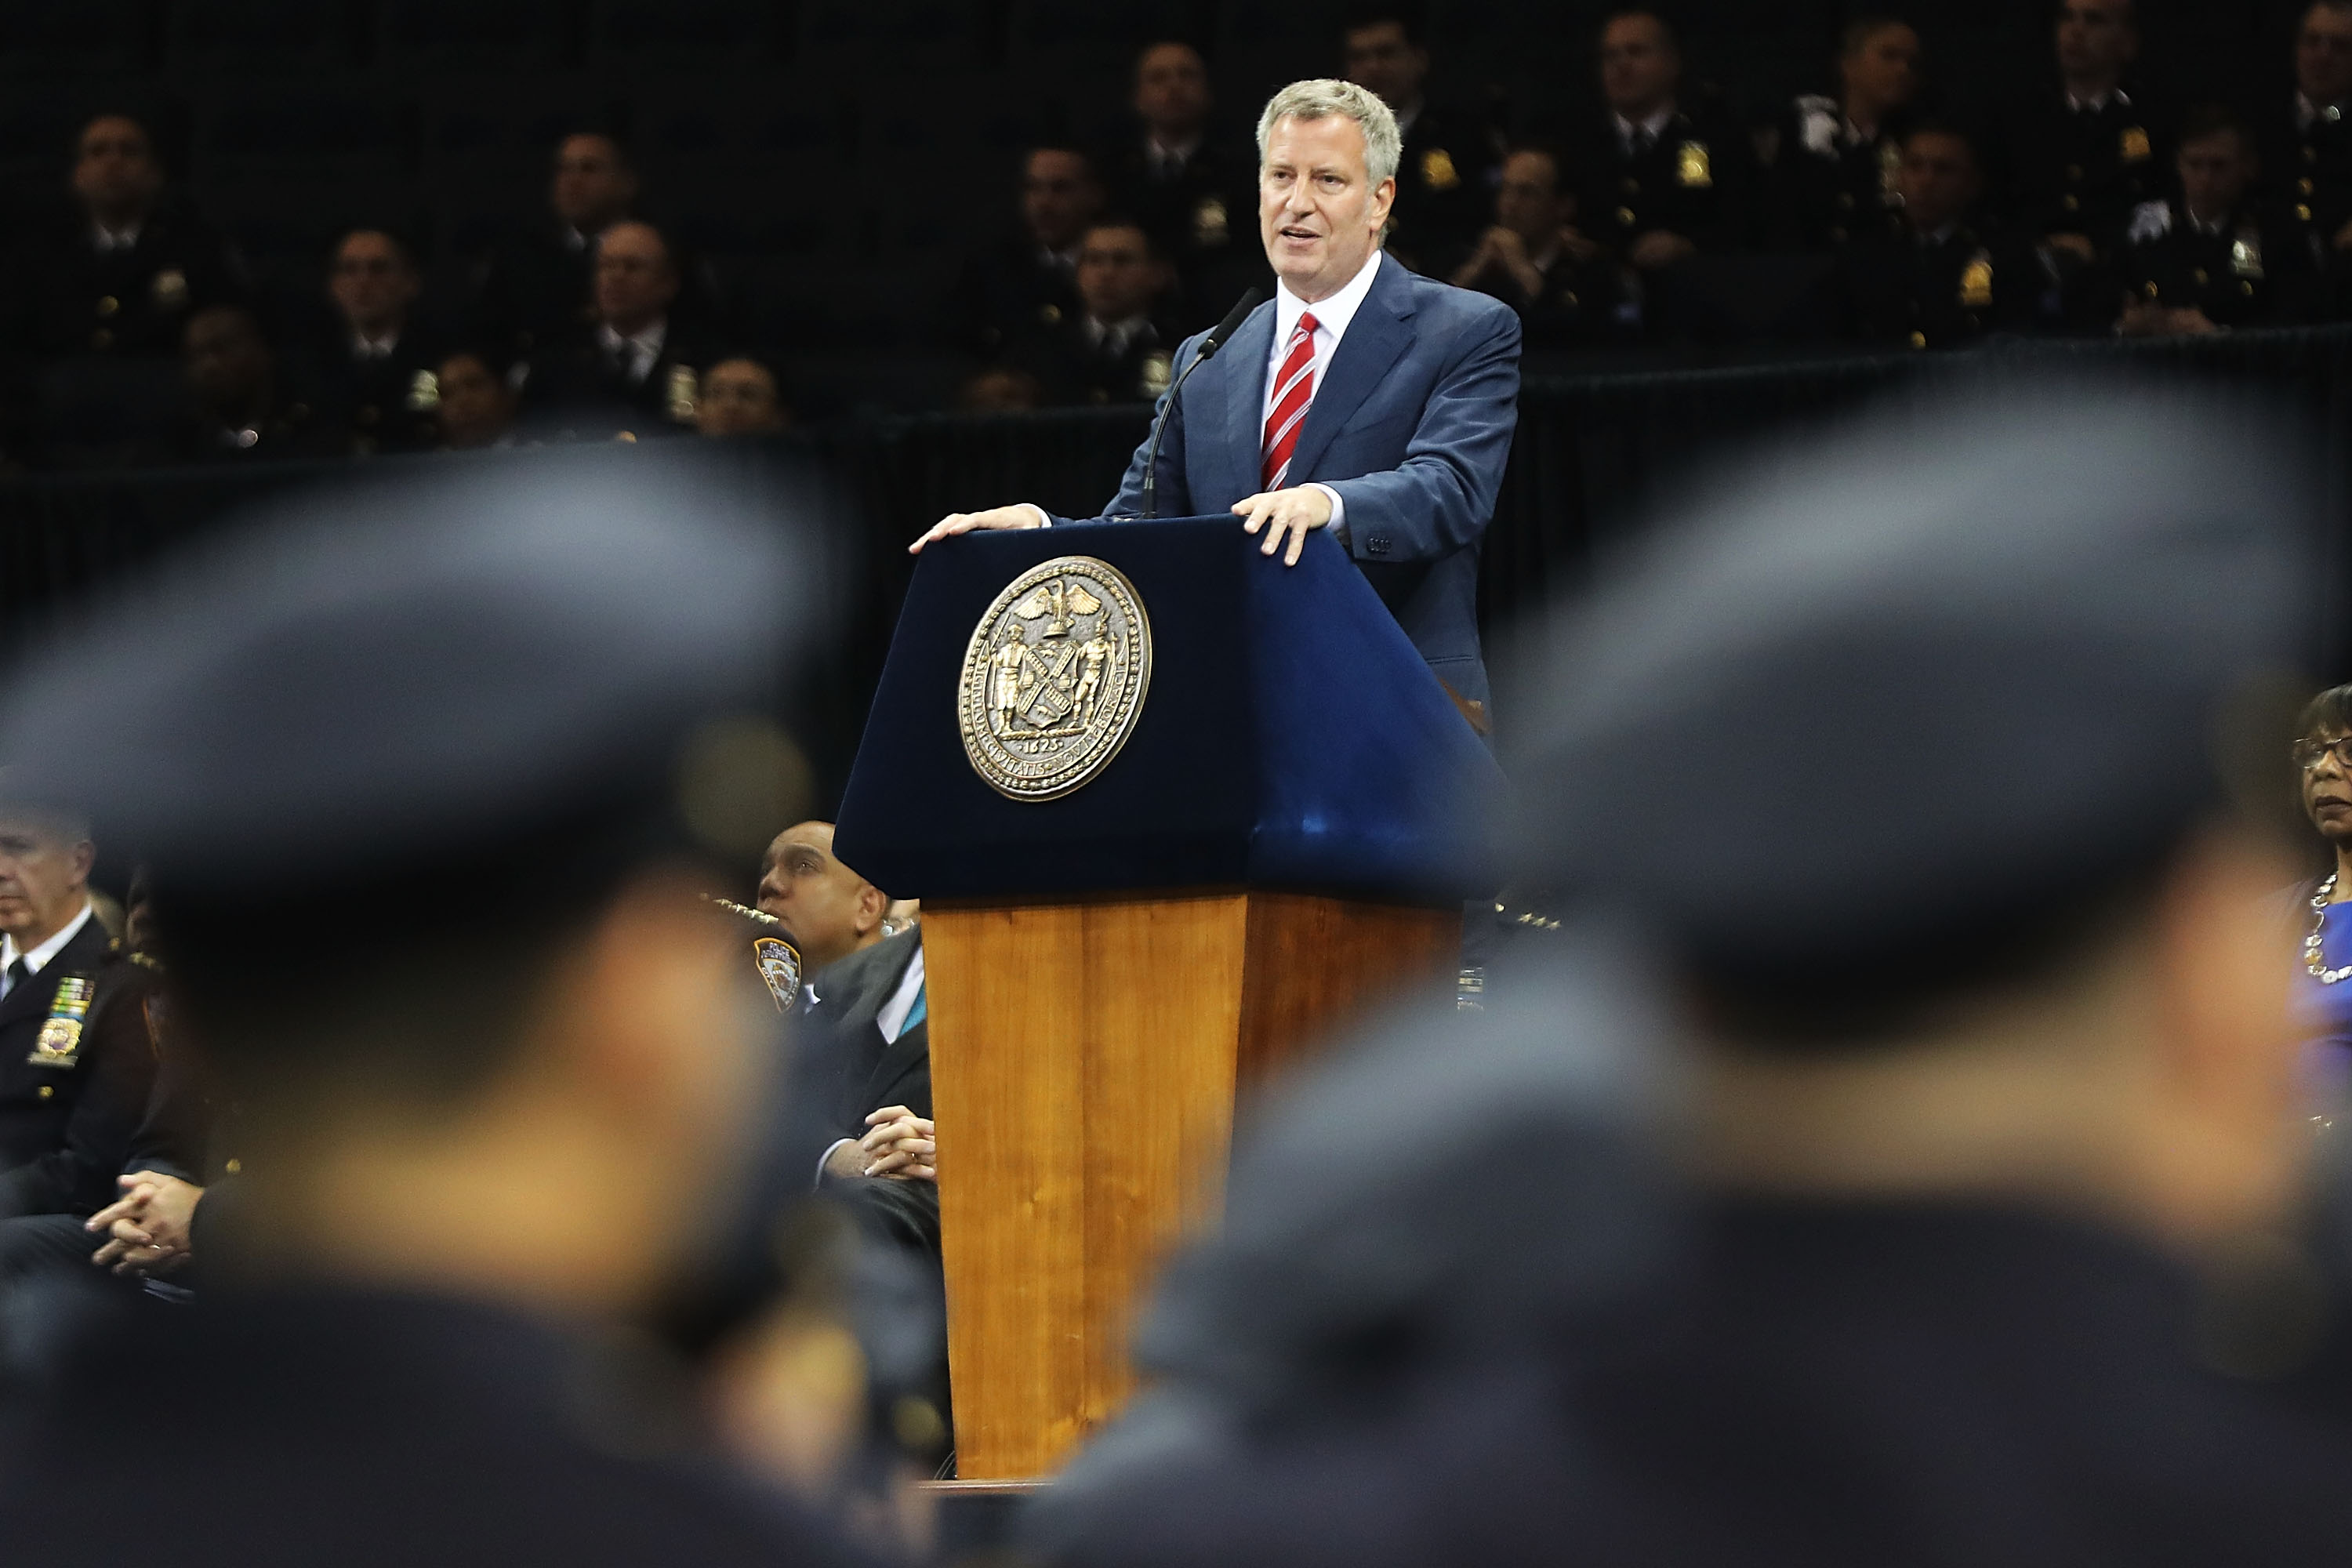 New York City Mayor Bill de Blasio speaks to new members of New York City's police department's graduating class during a swearing in ceremony at Madison Square Garden on July 1, 2016 in New York City. 